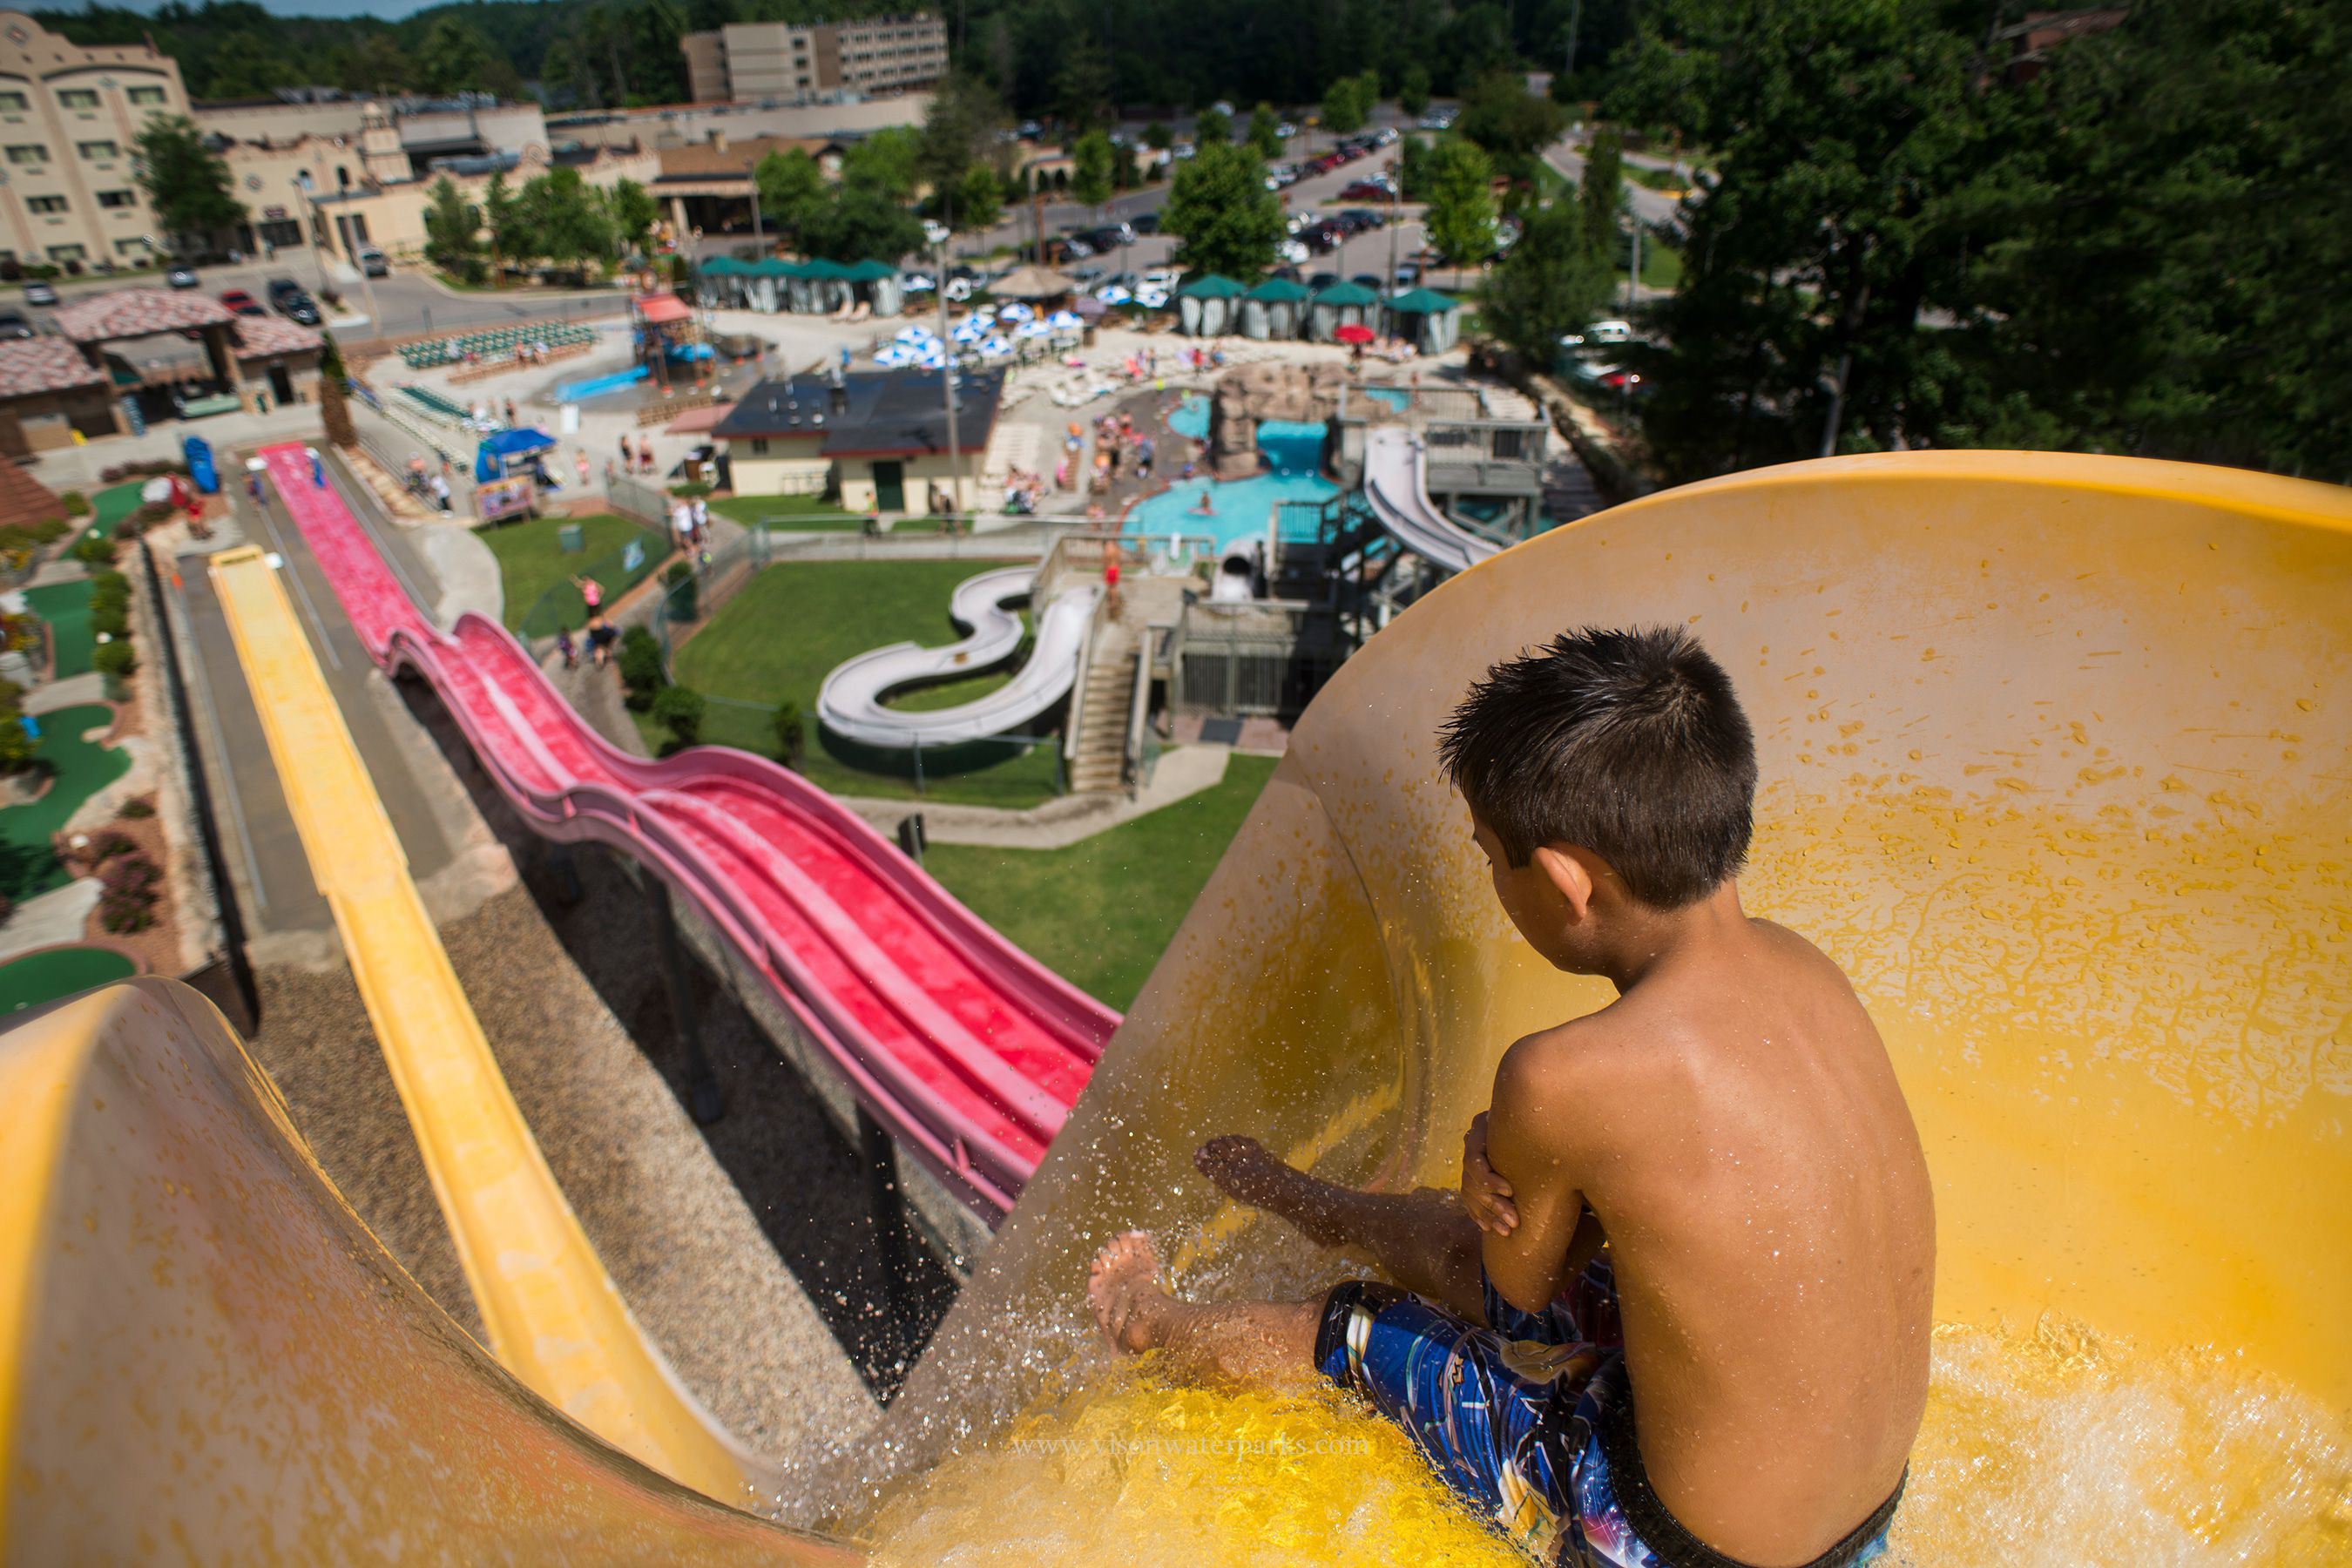 Why do water parks use height as a measurement for entry rather than weight or age restriction?